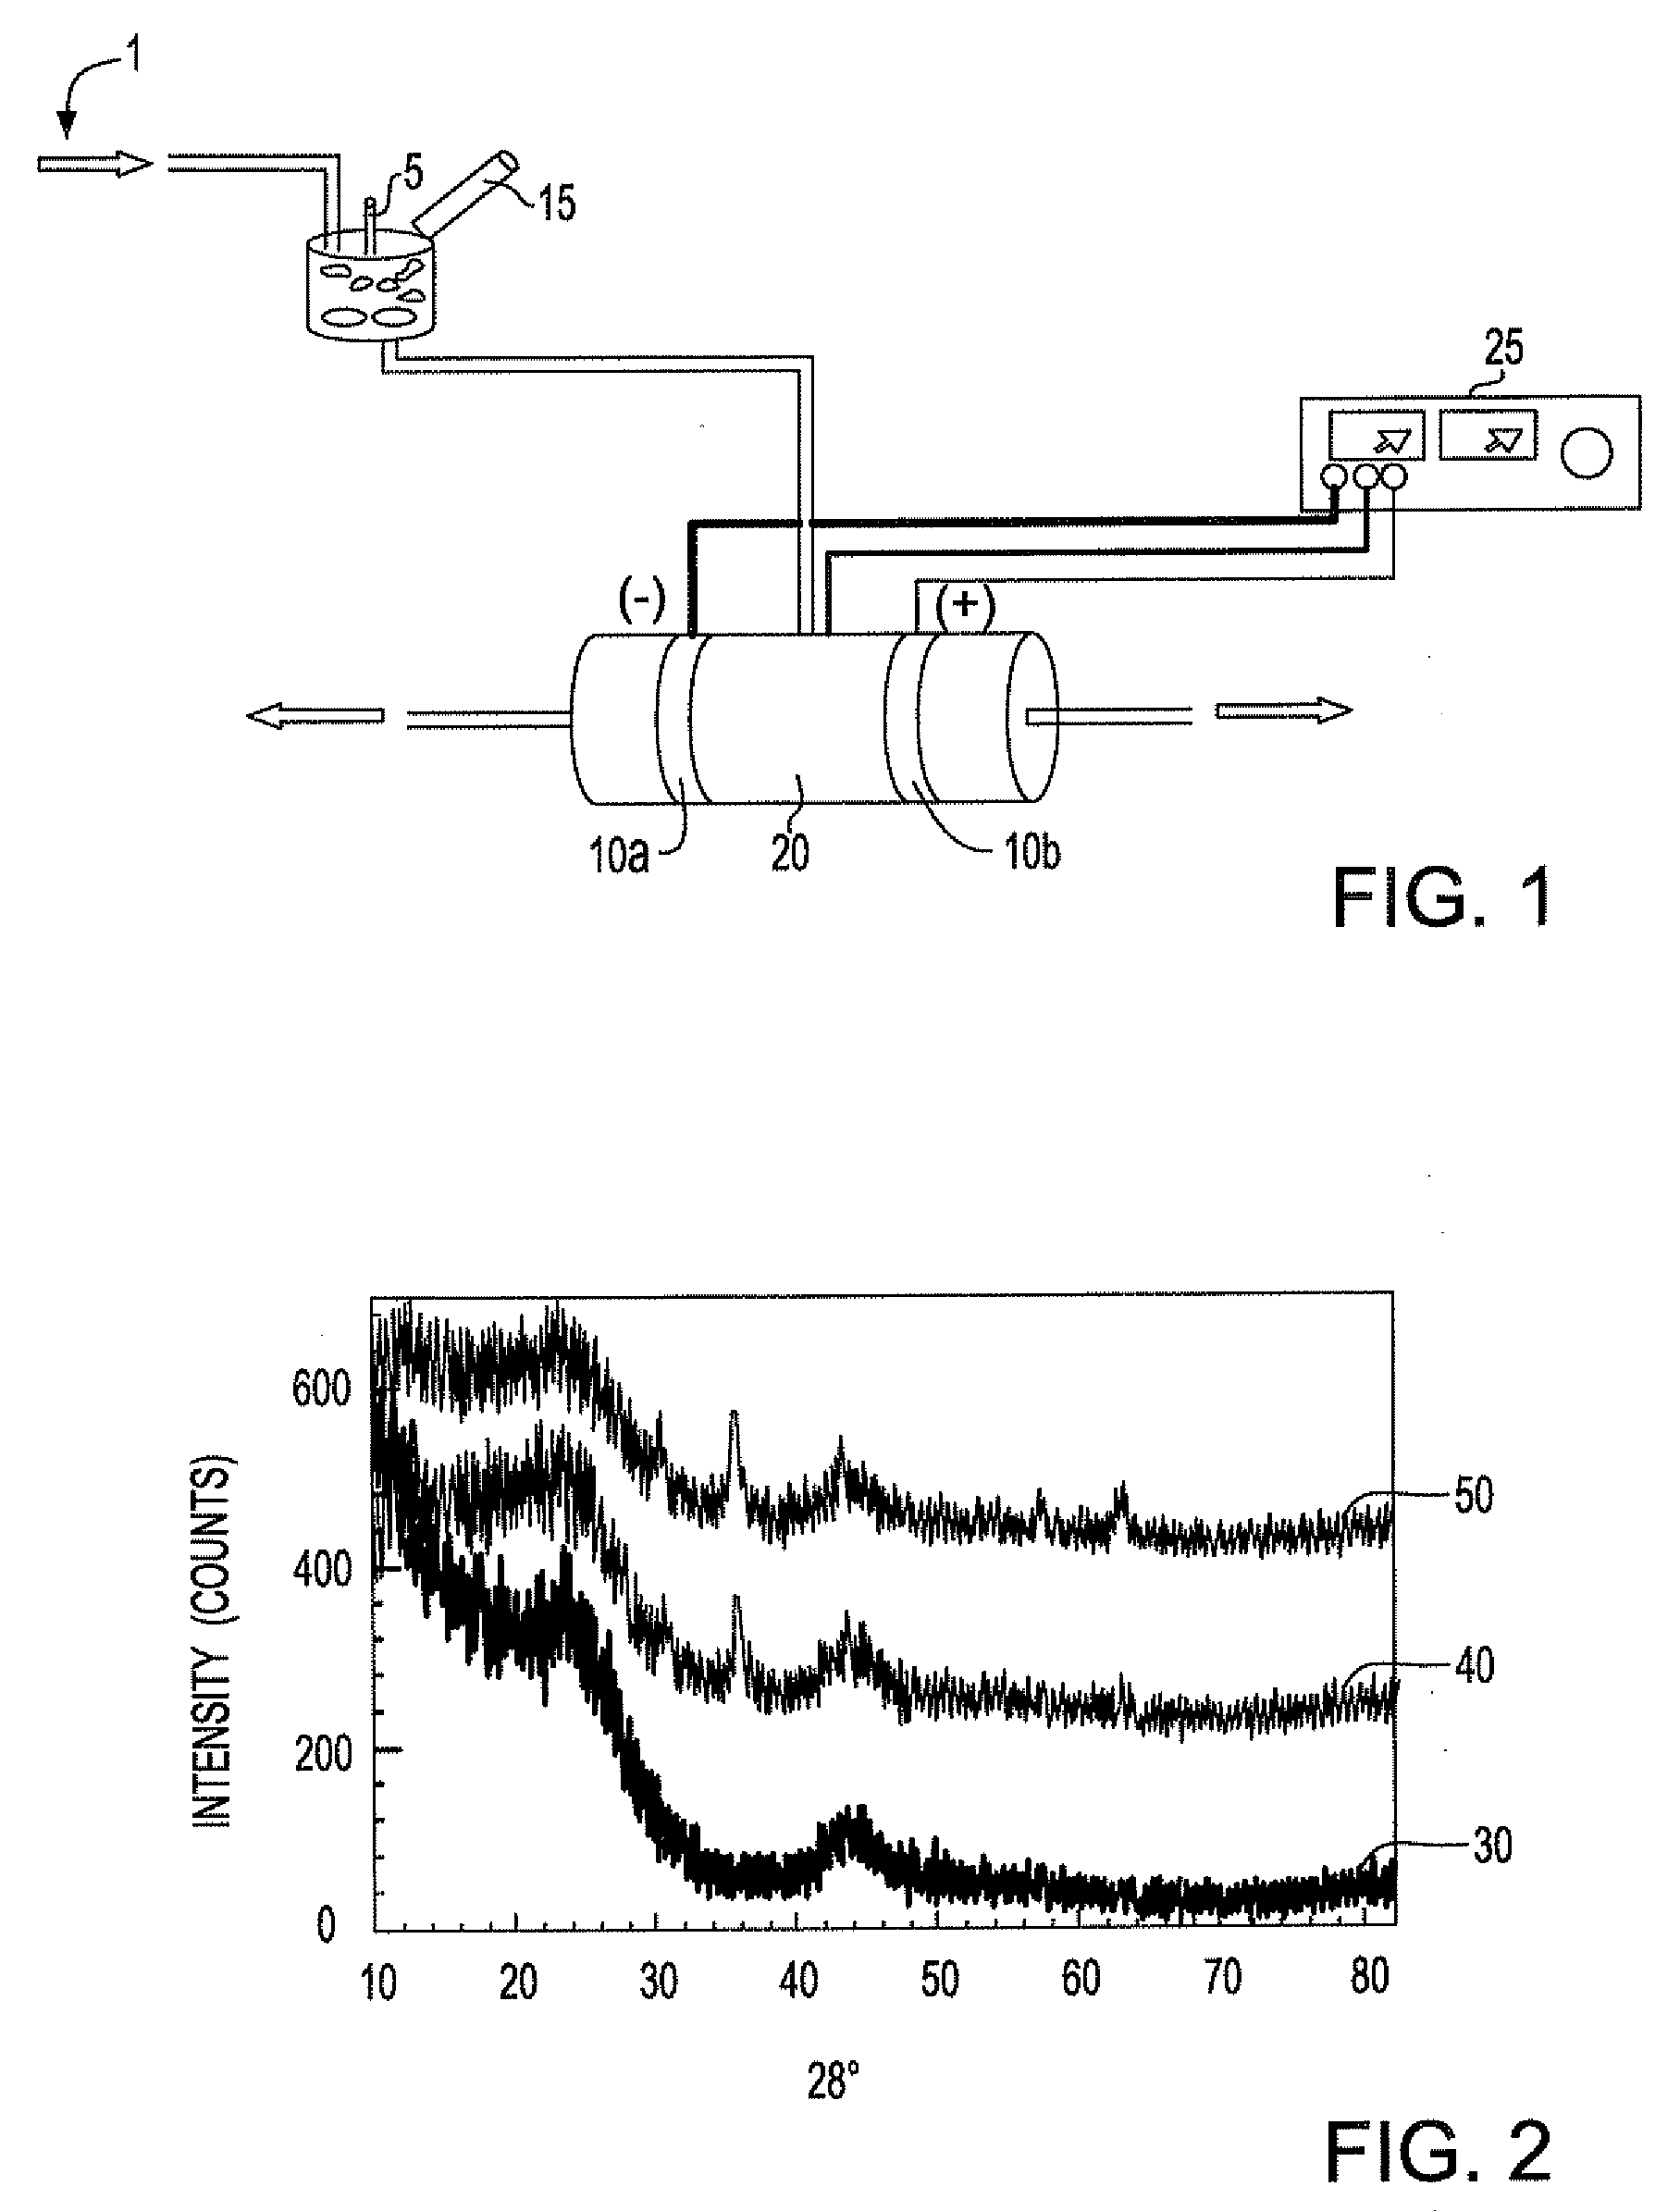 Magnetic filtration process, magnetic filtering material, and methods of forming magnetic filtering material